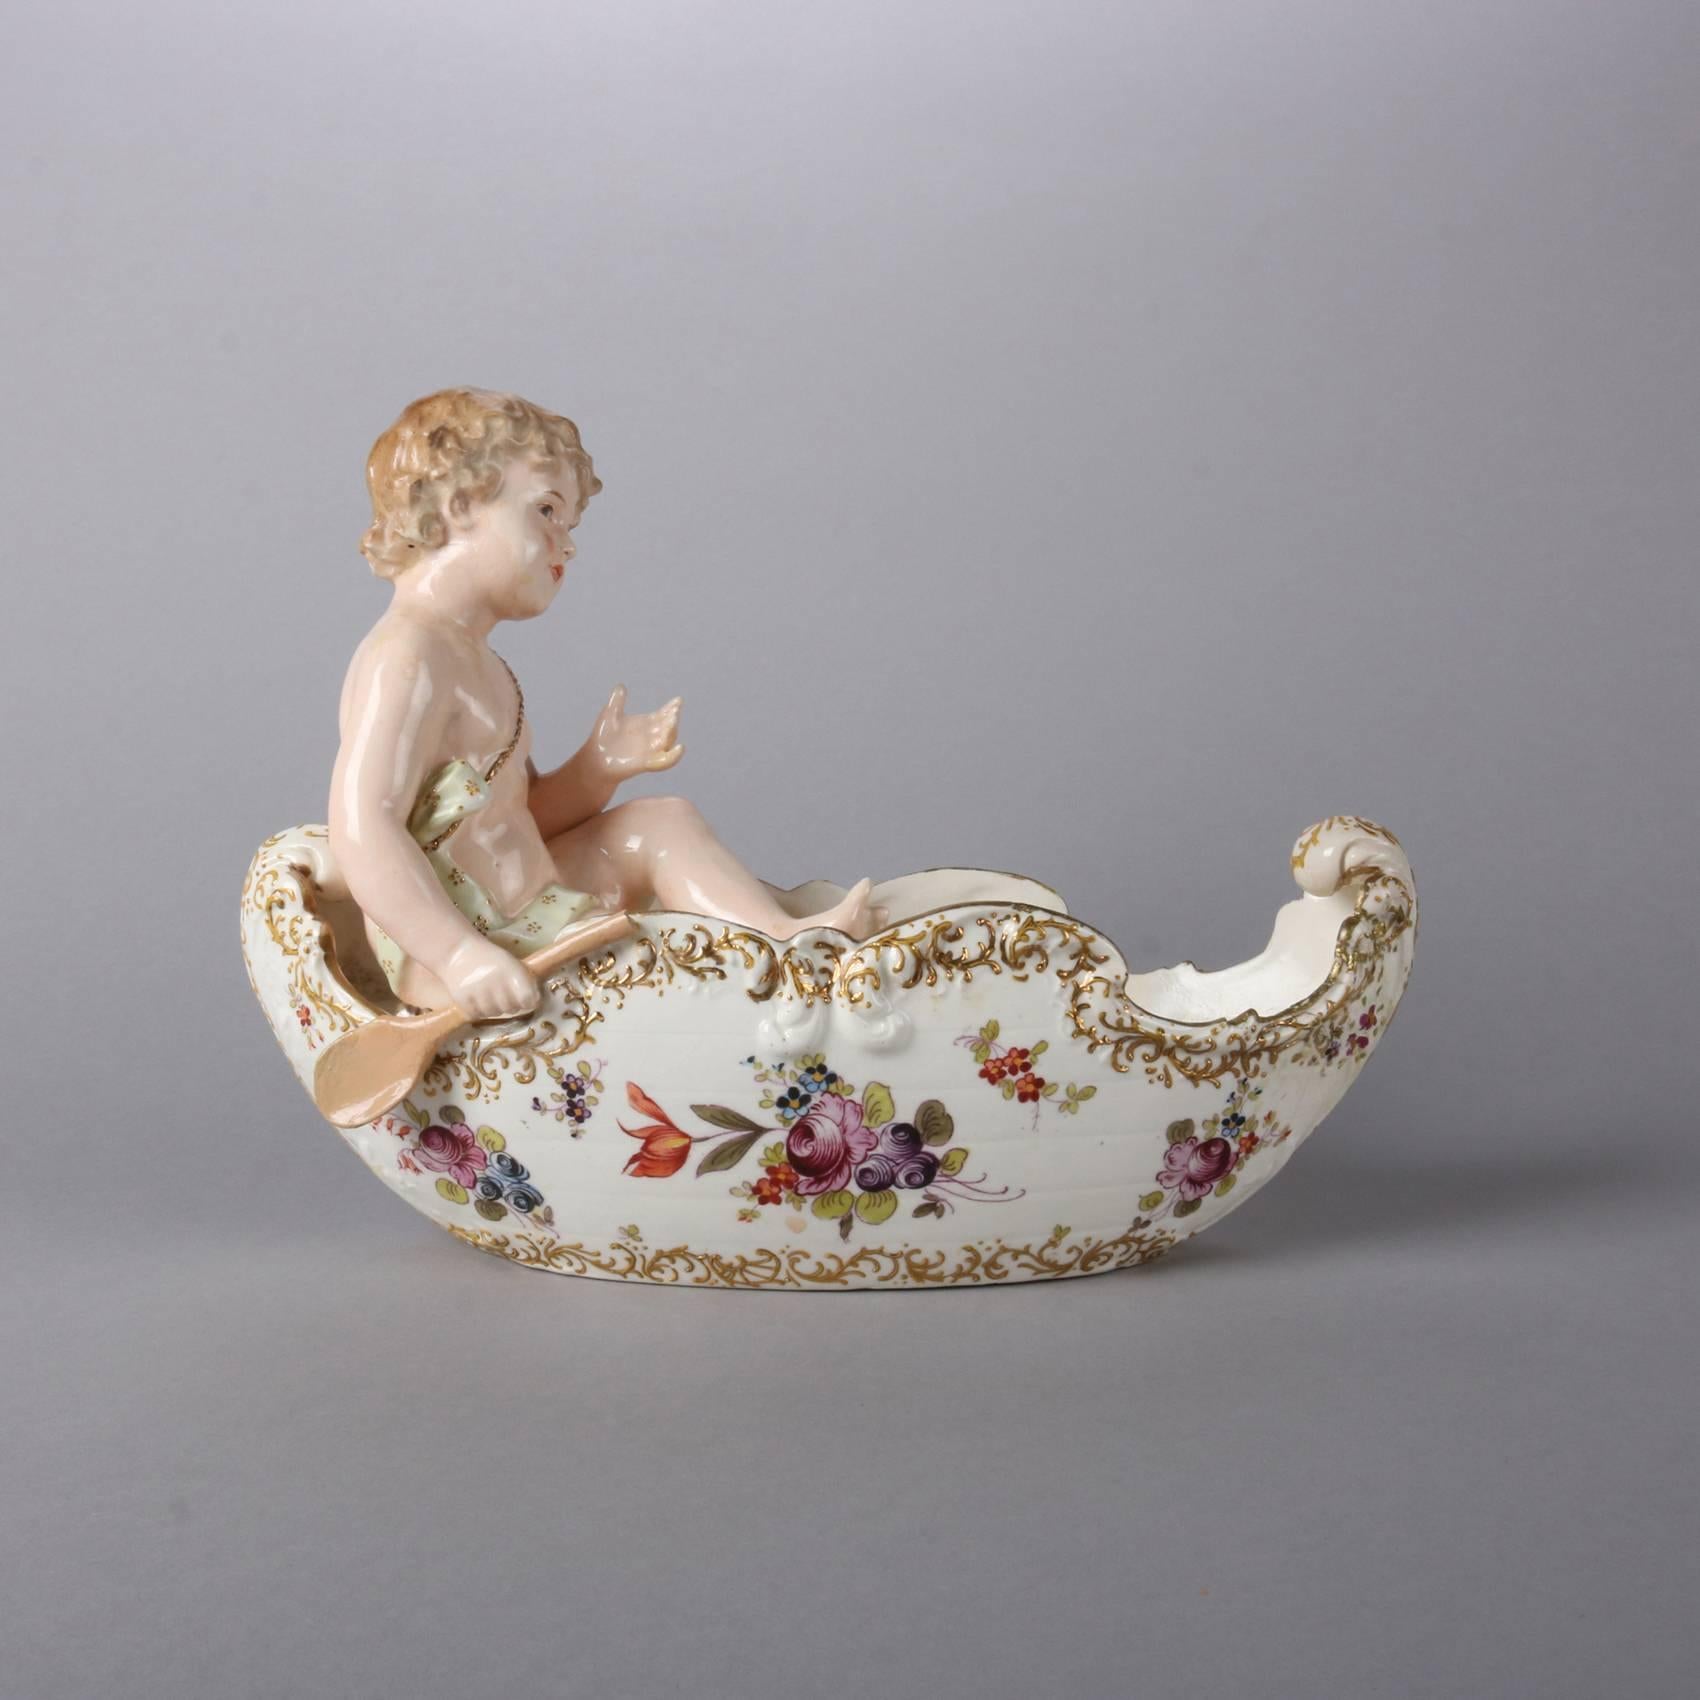 Antique German Meissen School figural porcelain center bowl features cane form with hand painted floral decoration with gilt embossed scroll and foliate decoration and young boy with his paddle, 19th century

Measures: 8.5" H x 11" W x